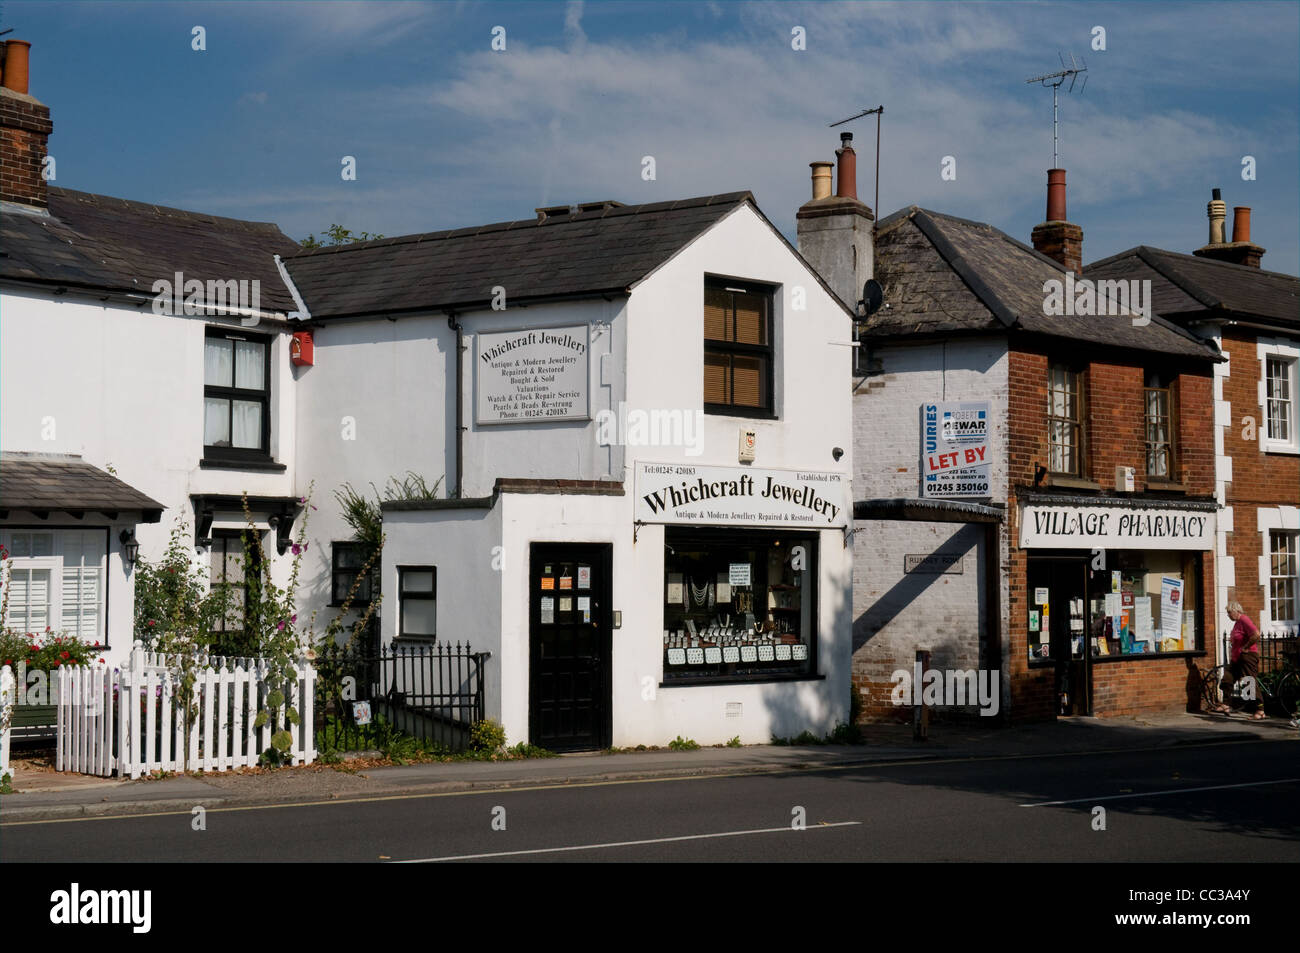 Shops In The Essex Village Of Writtle Just Outside Chelmsford The Village Is Famous As The 